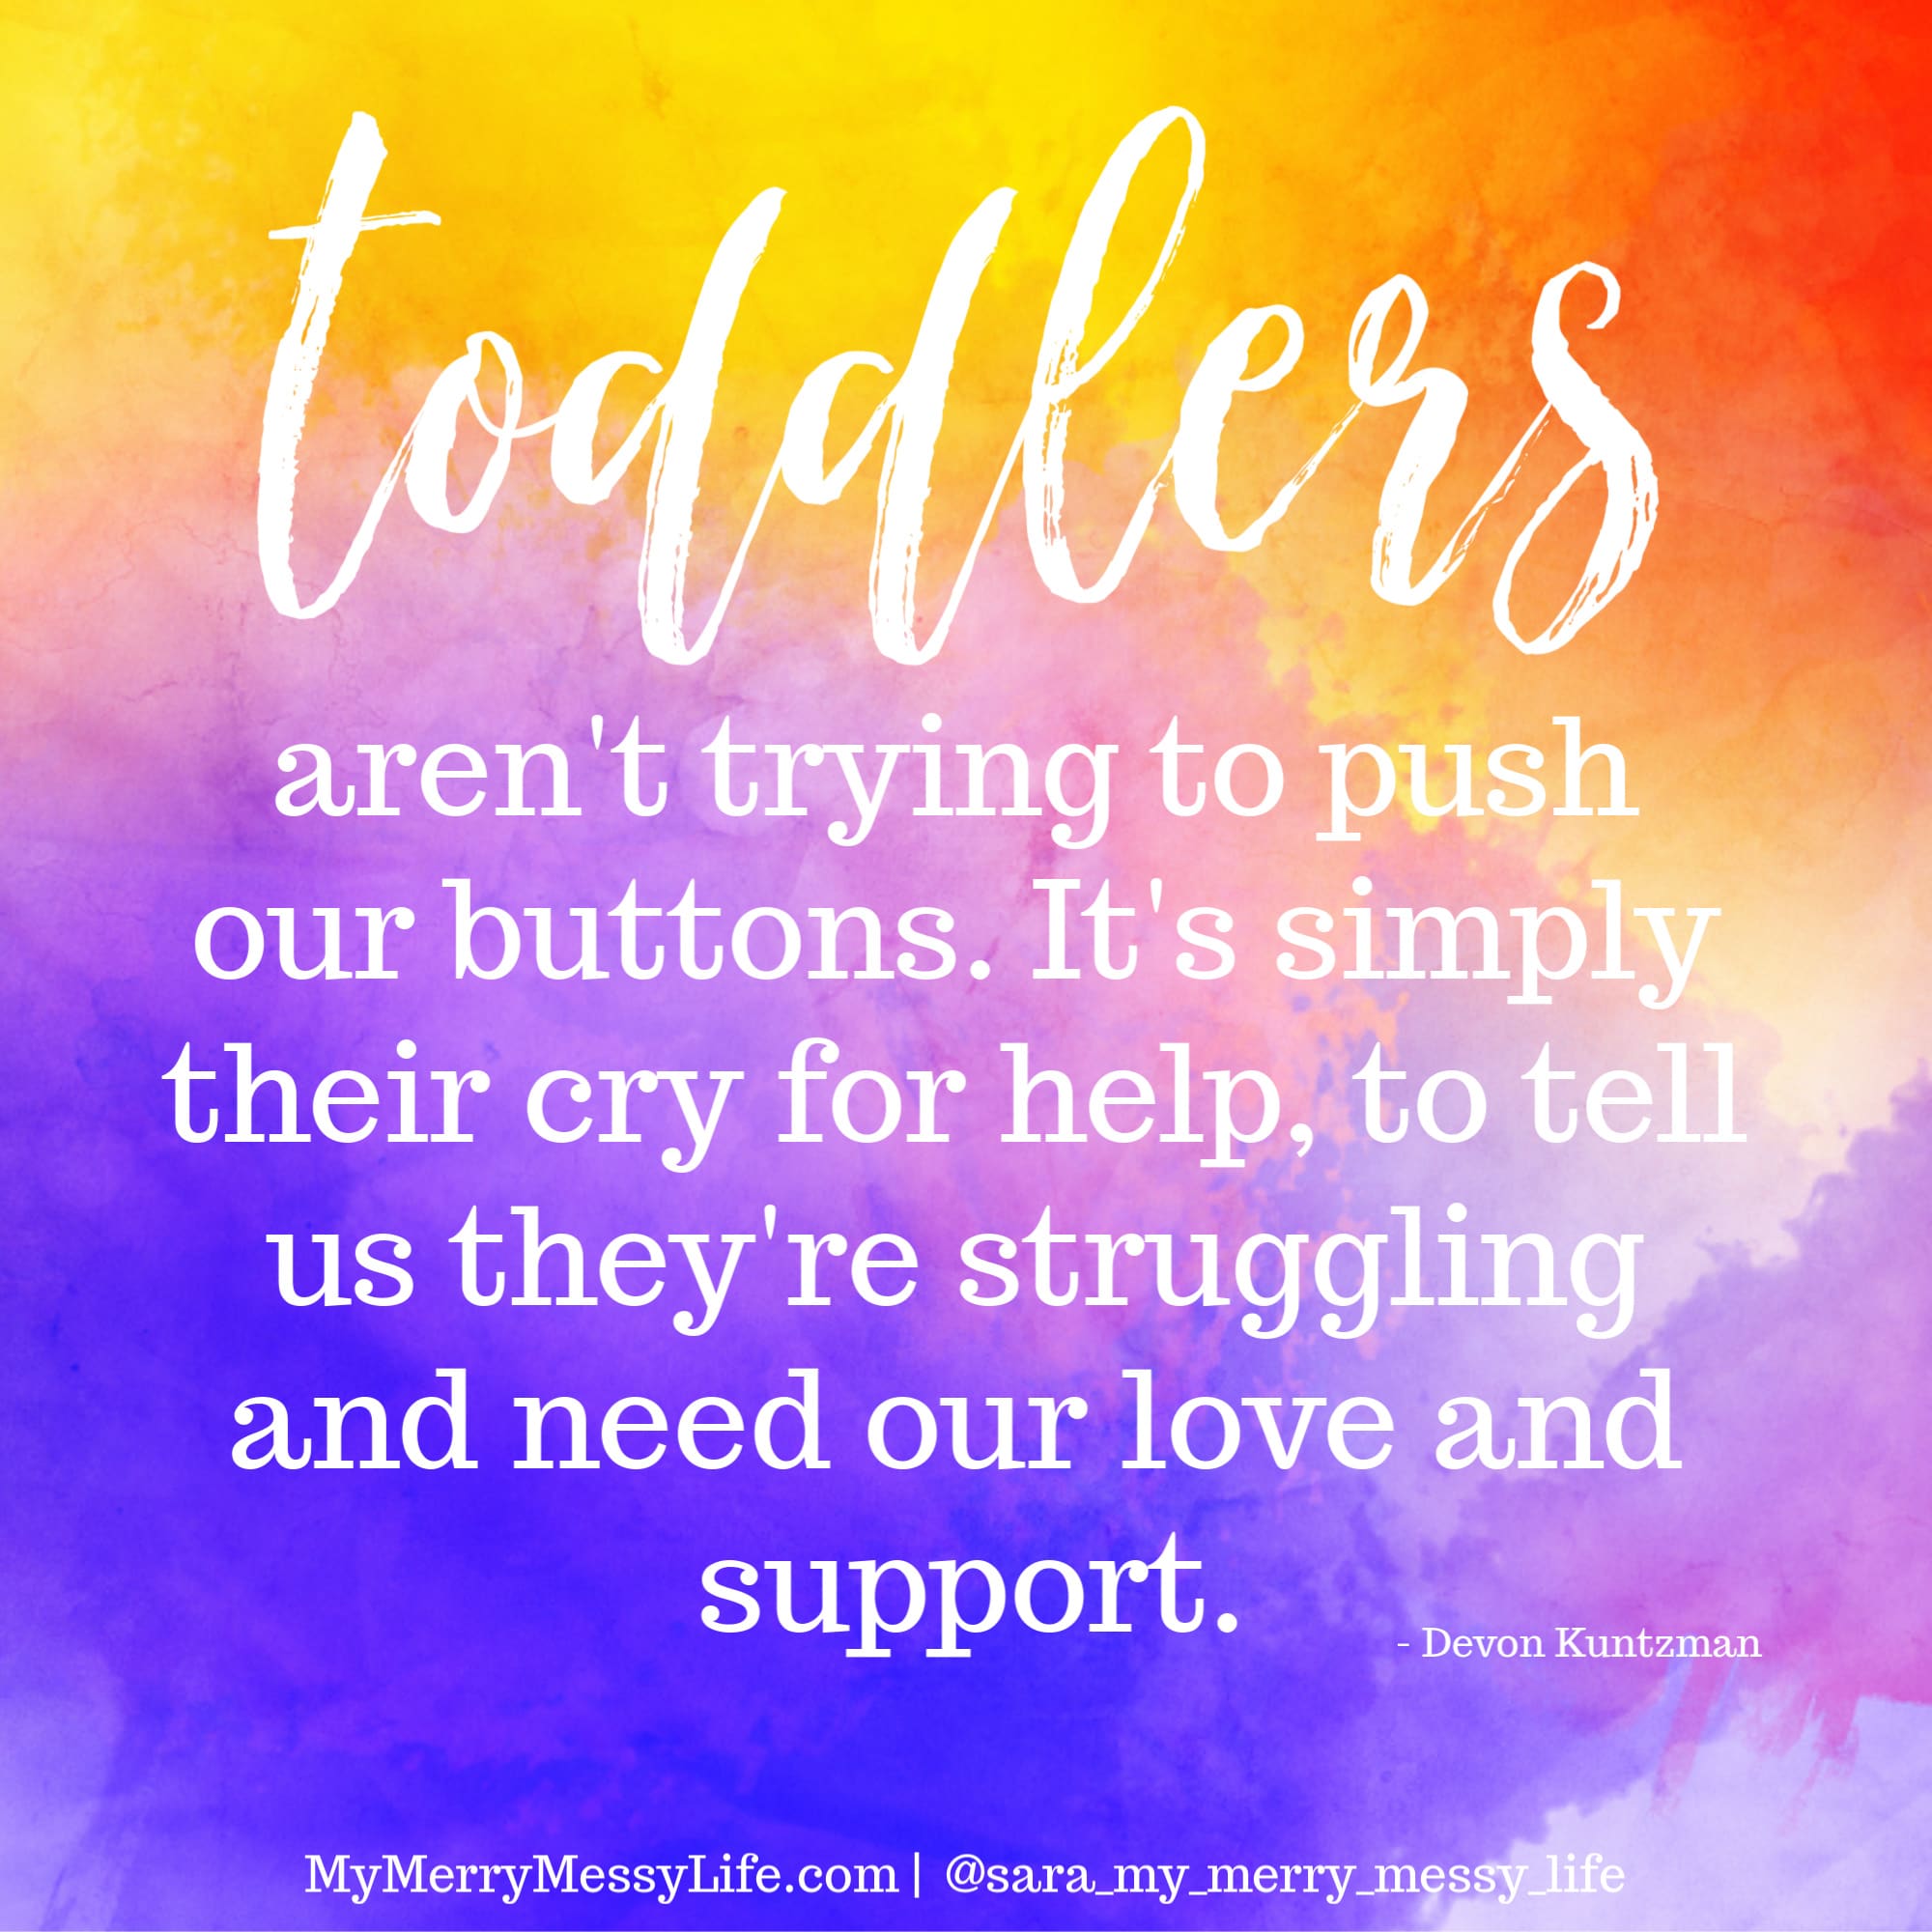 Toddlers aren't trying to push our buttons. It's simply their cry for help, to tell us they're struggling and need our love and support. - Devon Kuntzman